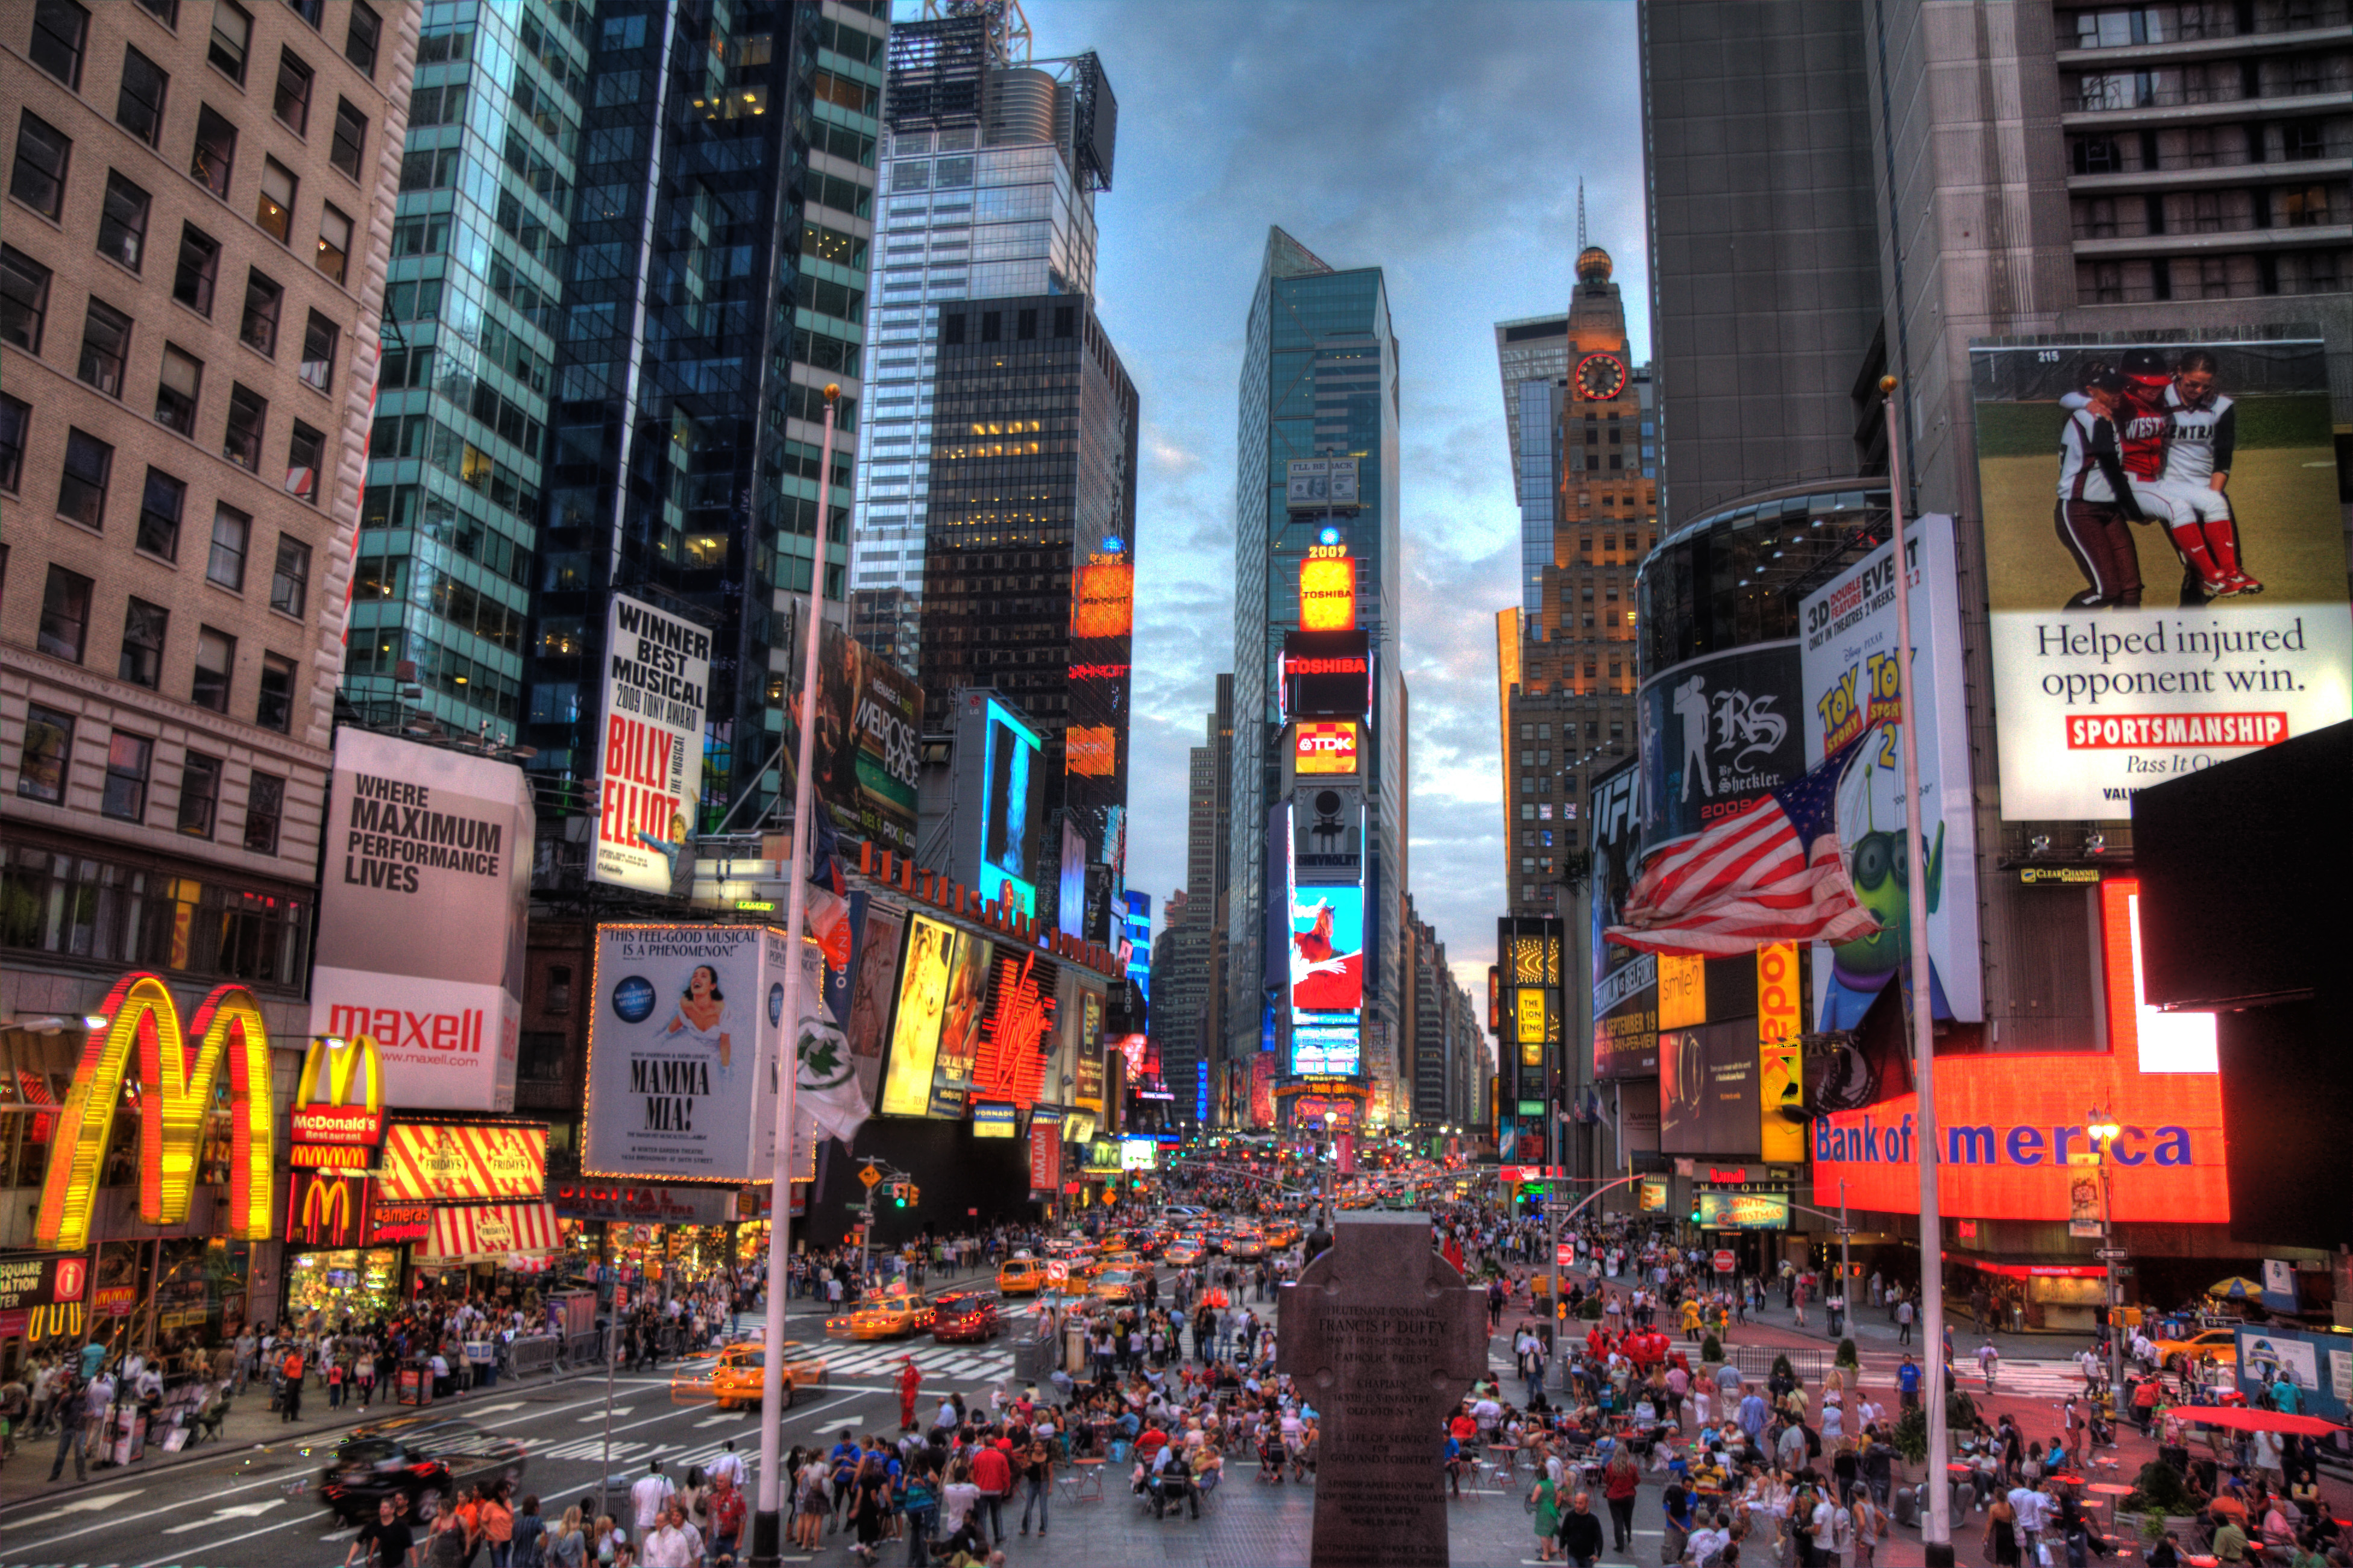 A view of Times Square.